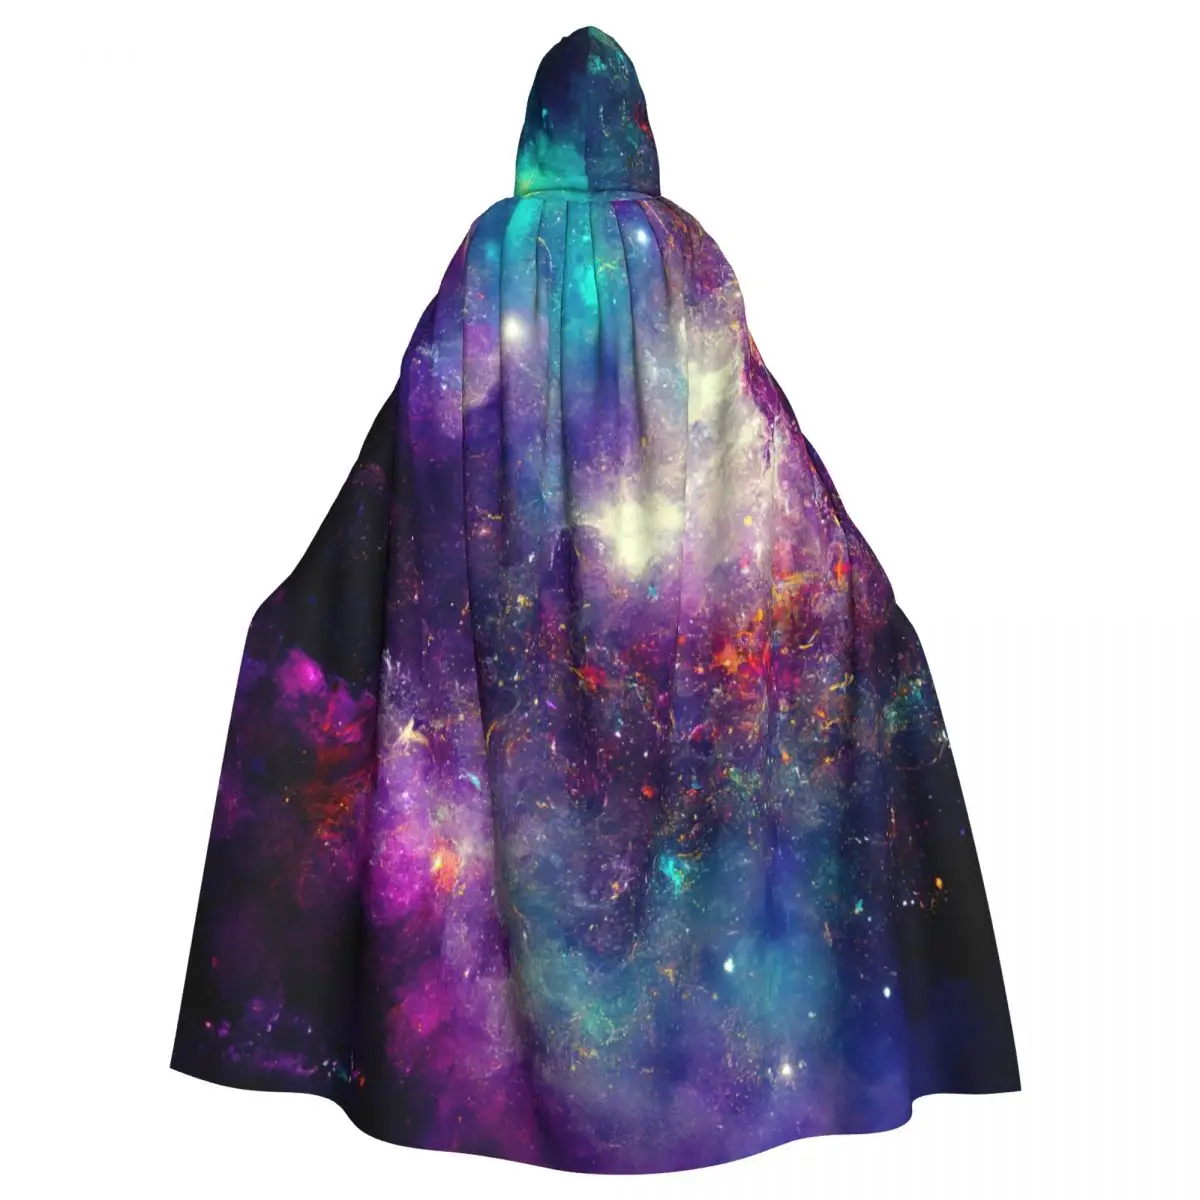 

Hooded Cloak Unisex Cloak with Hood Stardust Shining Stars With Nebula Milky Way Cloak Vampire Witch Cape Cosplay Costume